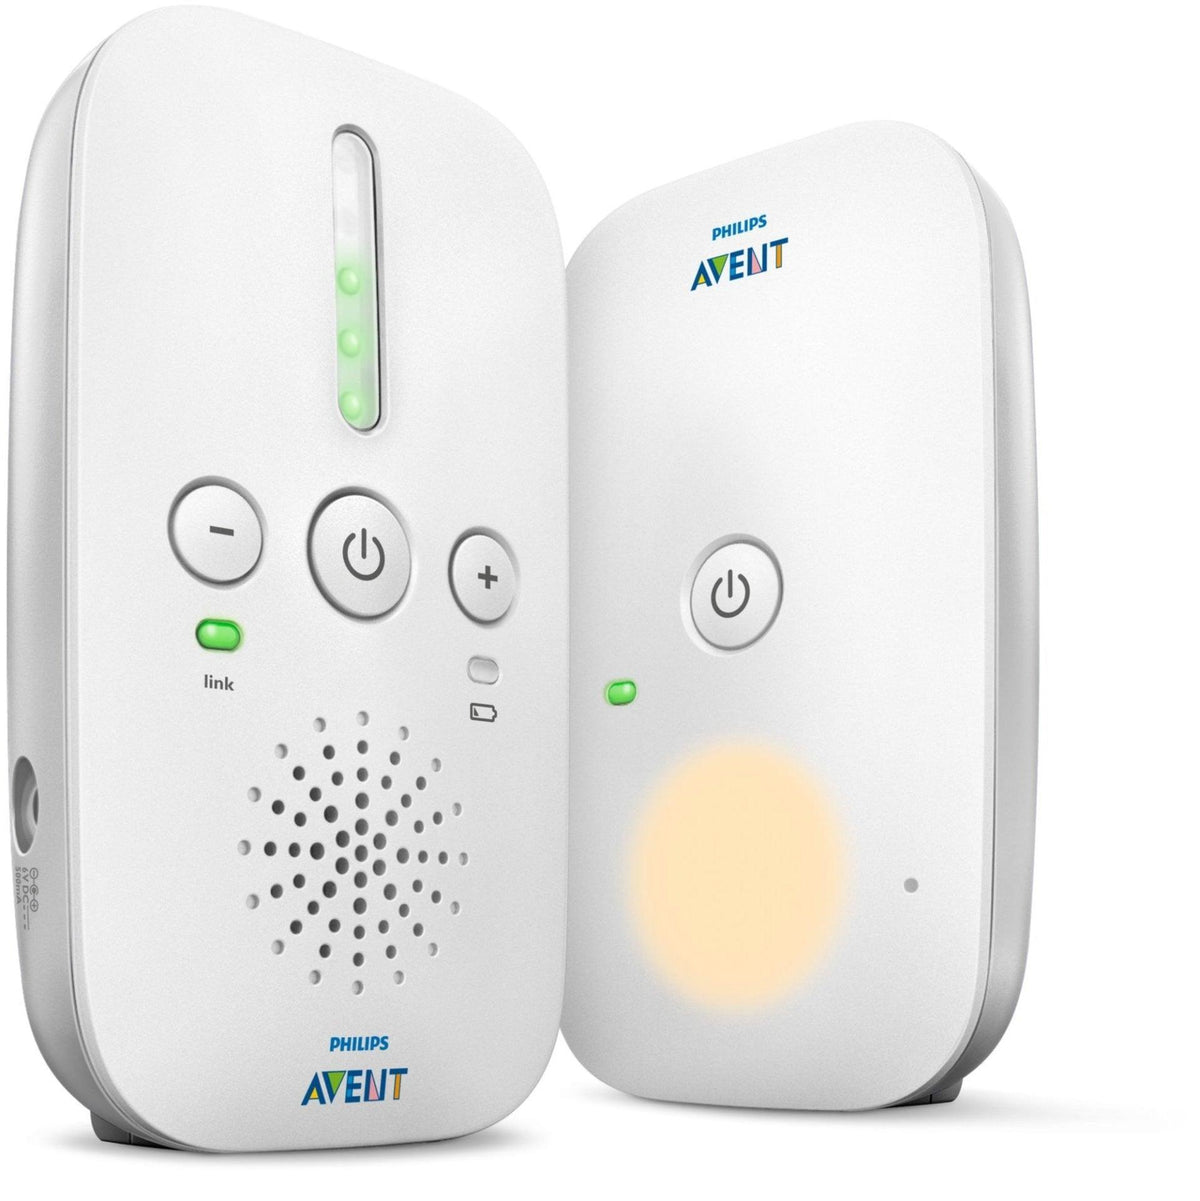 Philips Avent - Philips Avent DECT baby monitor SCD502/26 - Mari Kali Stores Cyprus